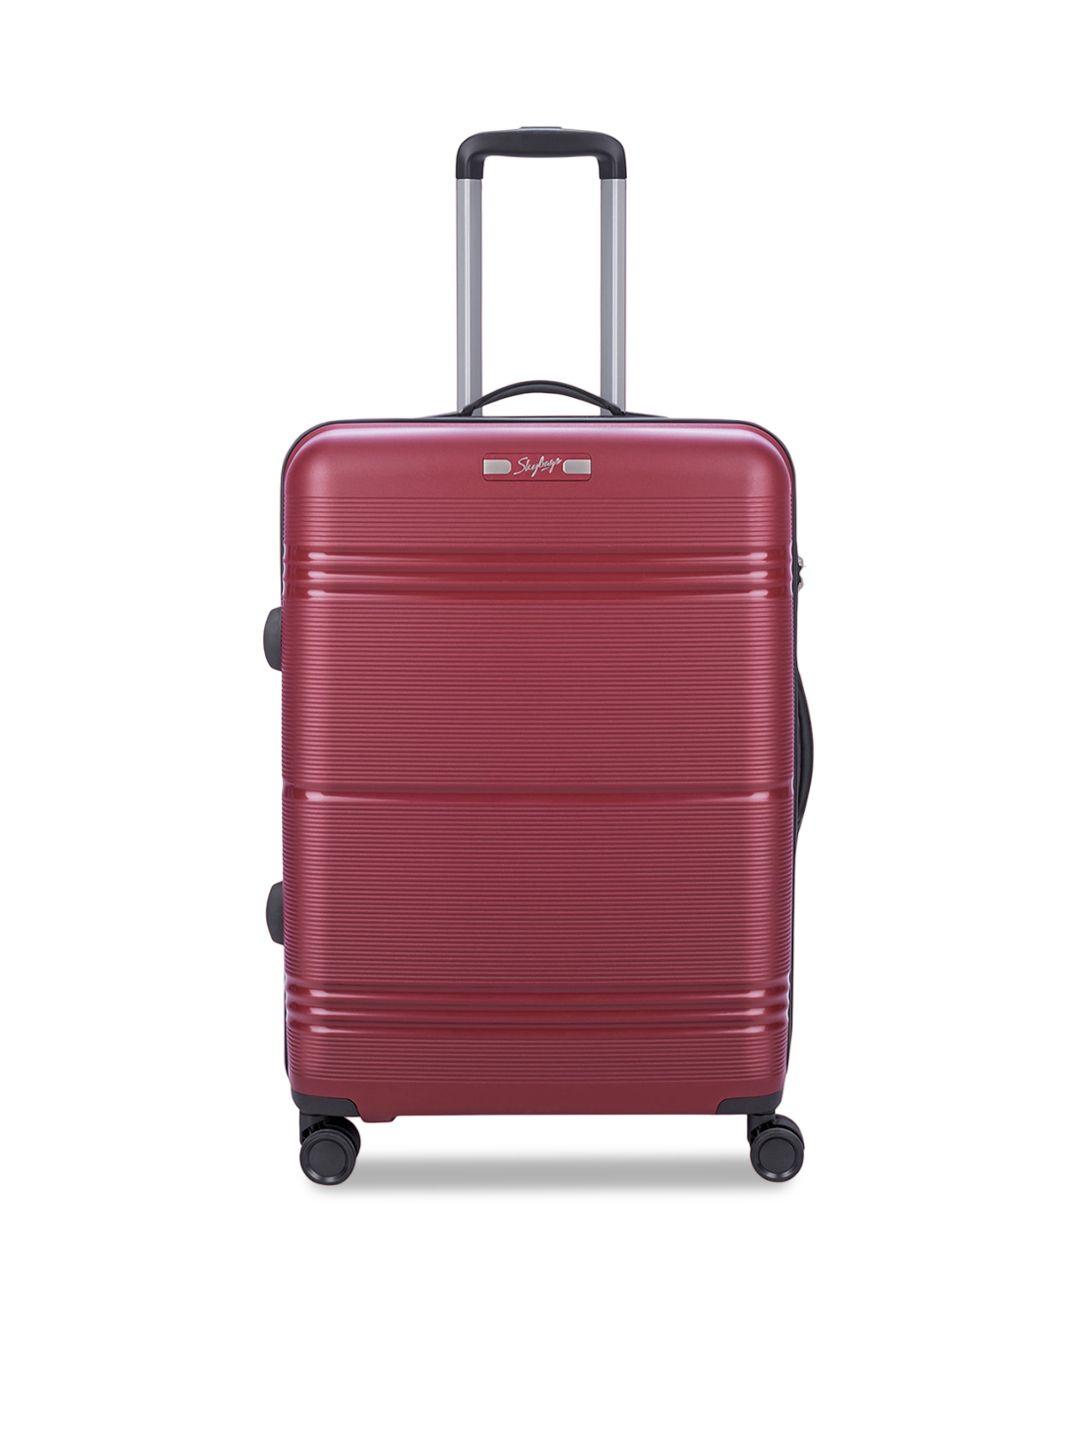 skybags hard -sided medium trolley suitcase